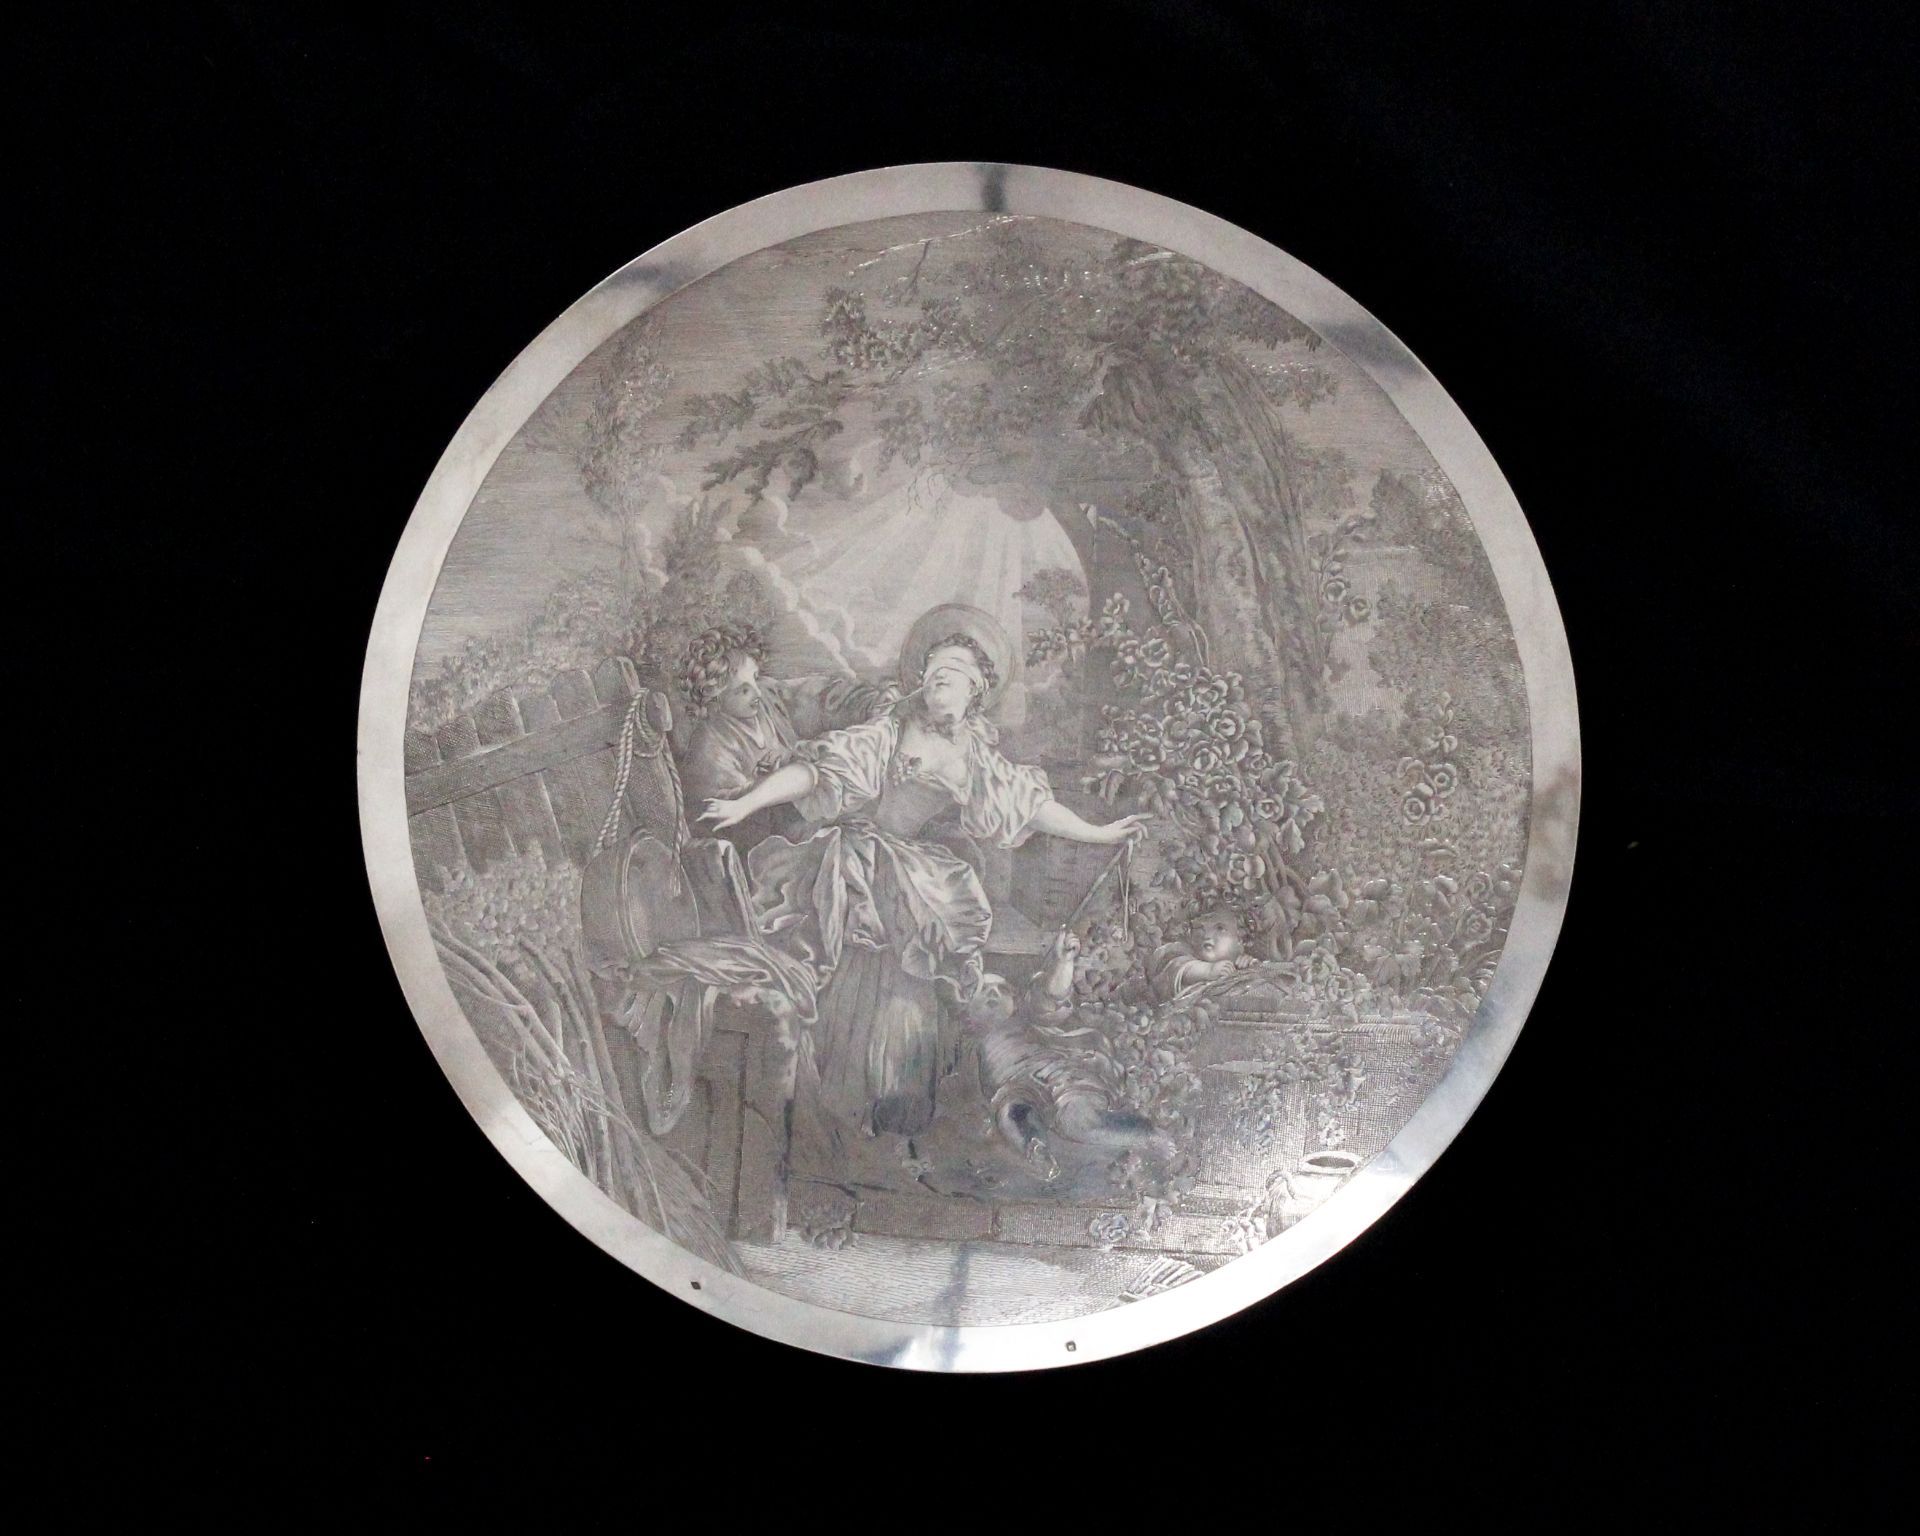 An antique French wall platter / plaque circa 1880 with a very finely engraved depiction of a